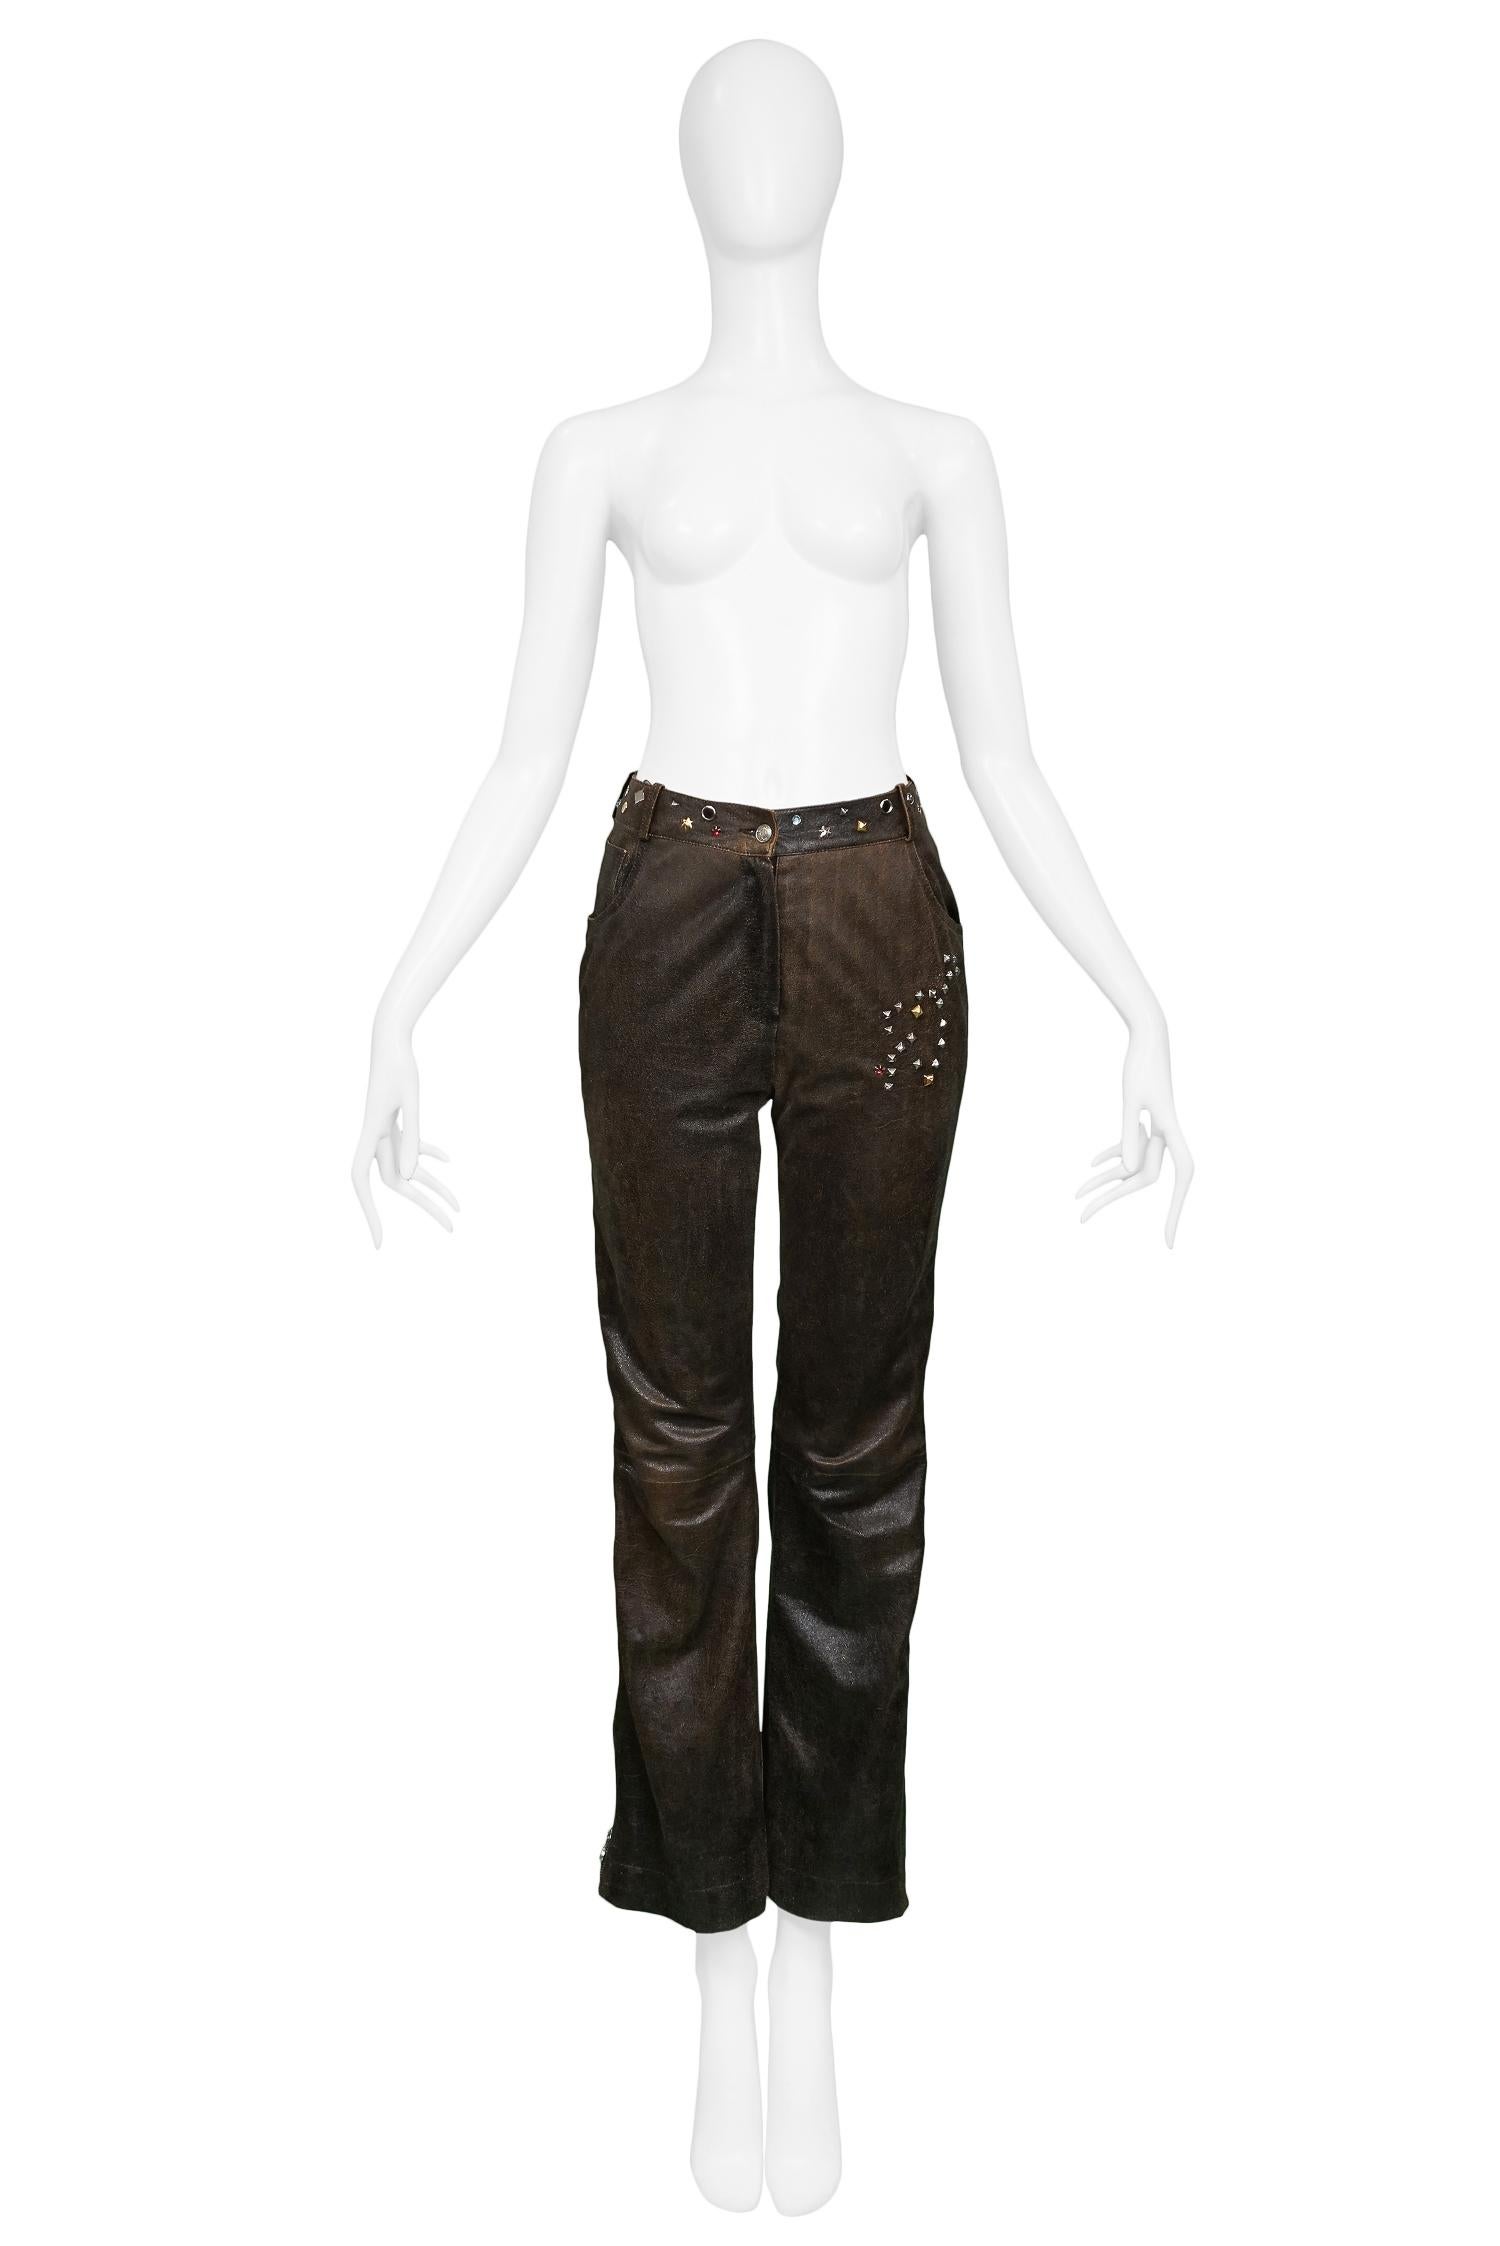 dior leather pants